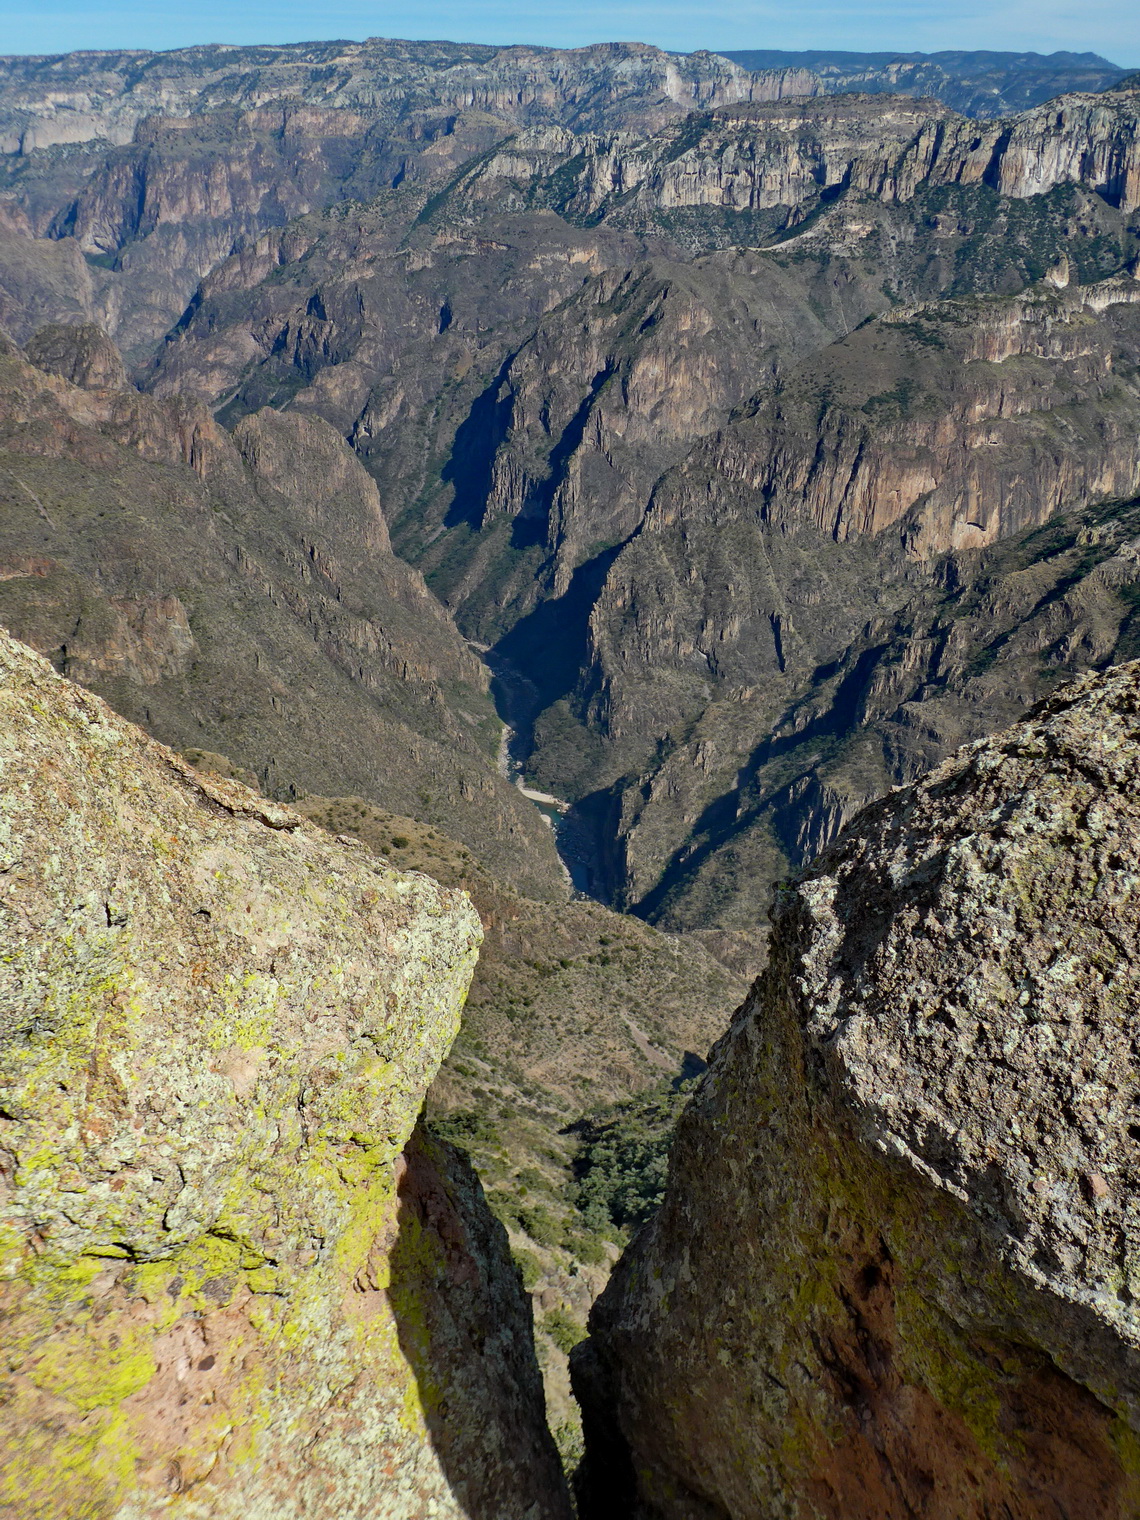 The bottom of the Copper Canyon